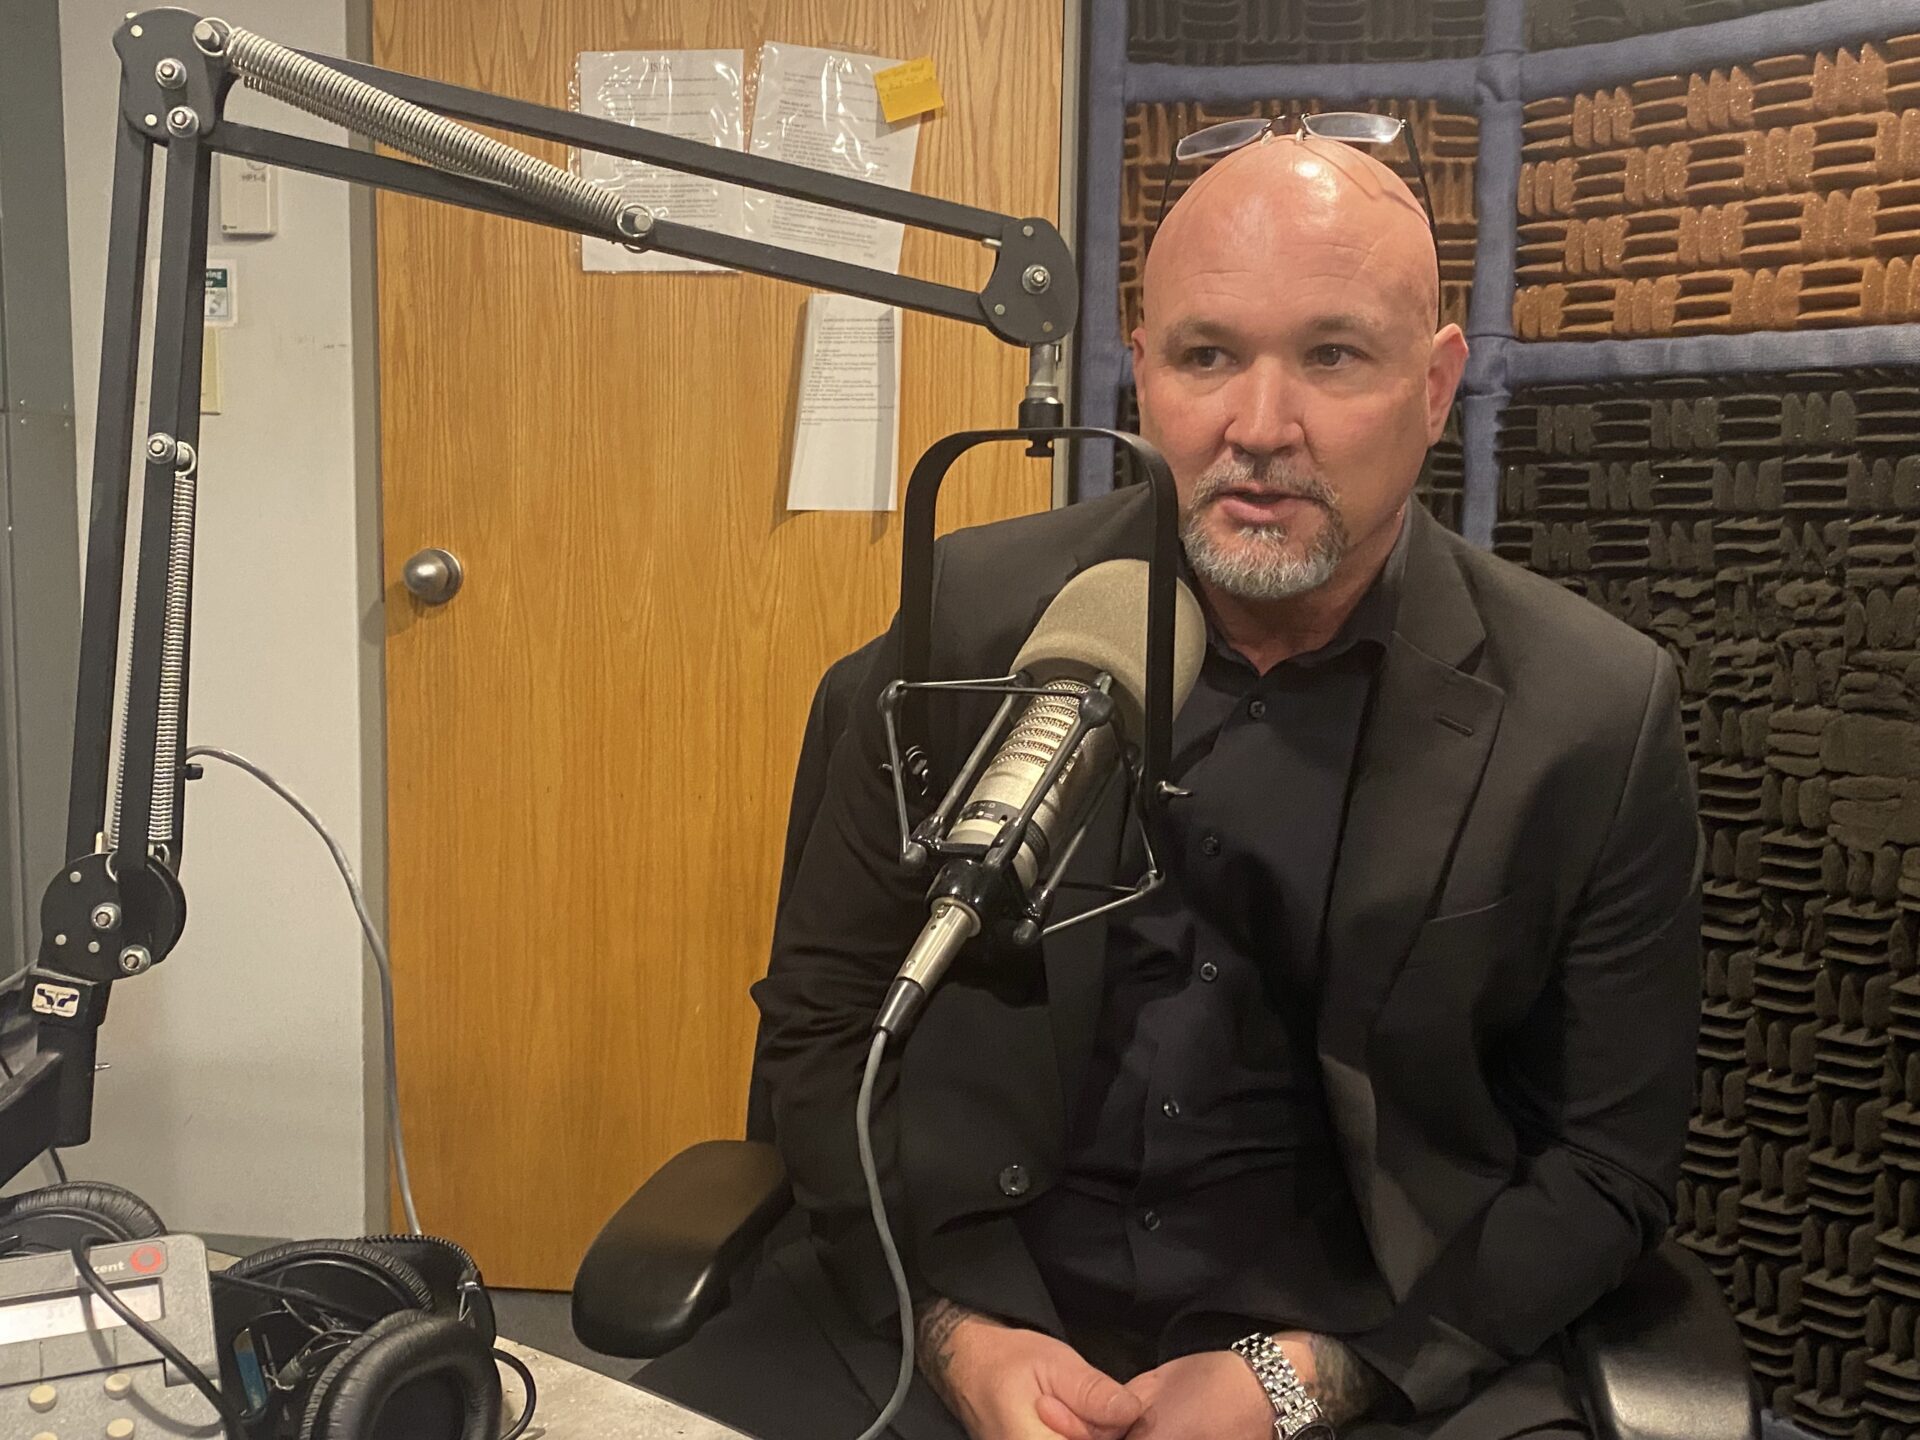 Bald man with beard dressed in black at studio microphone.